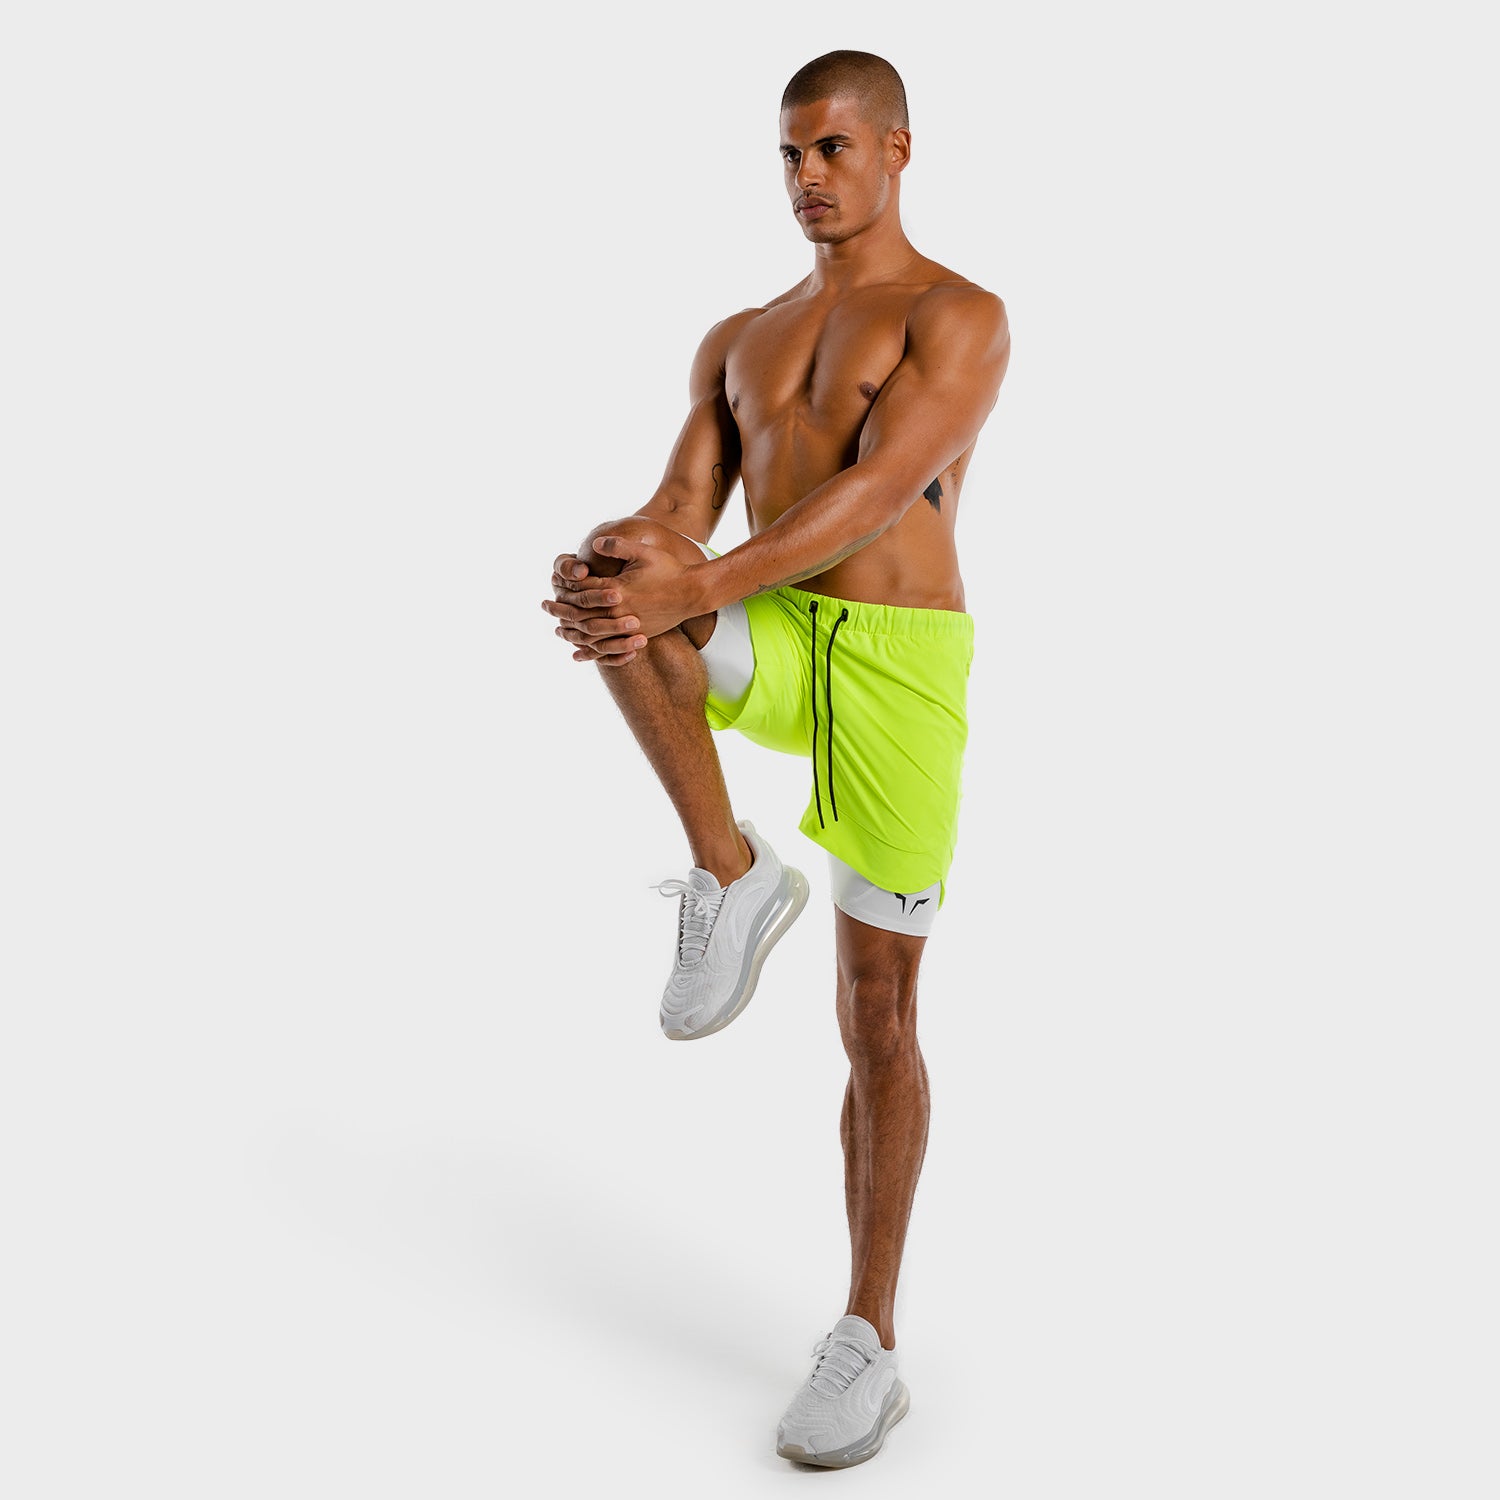 squatwolf-workout-short-for-men-limitless-2-in-1-shorts-neon-white-gym-wear